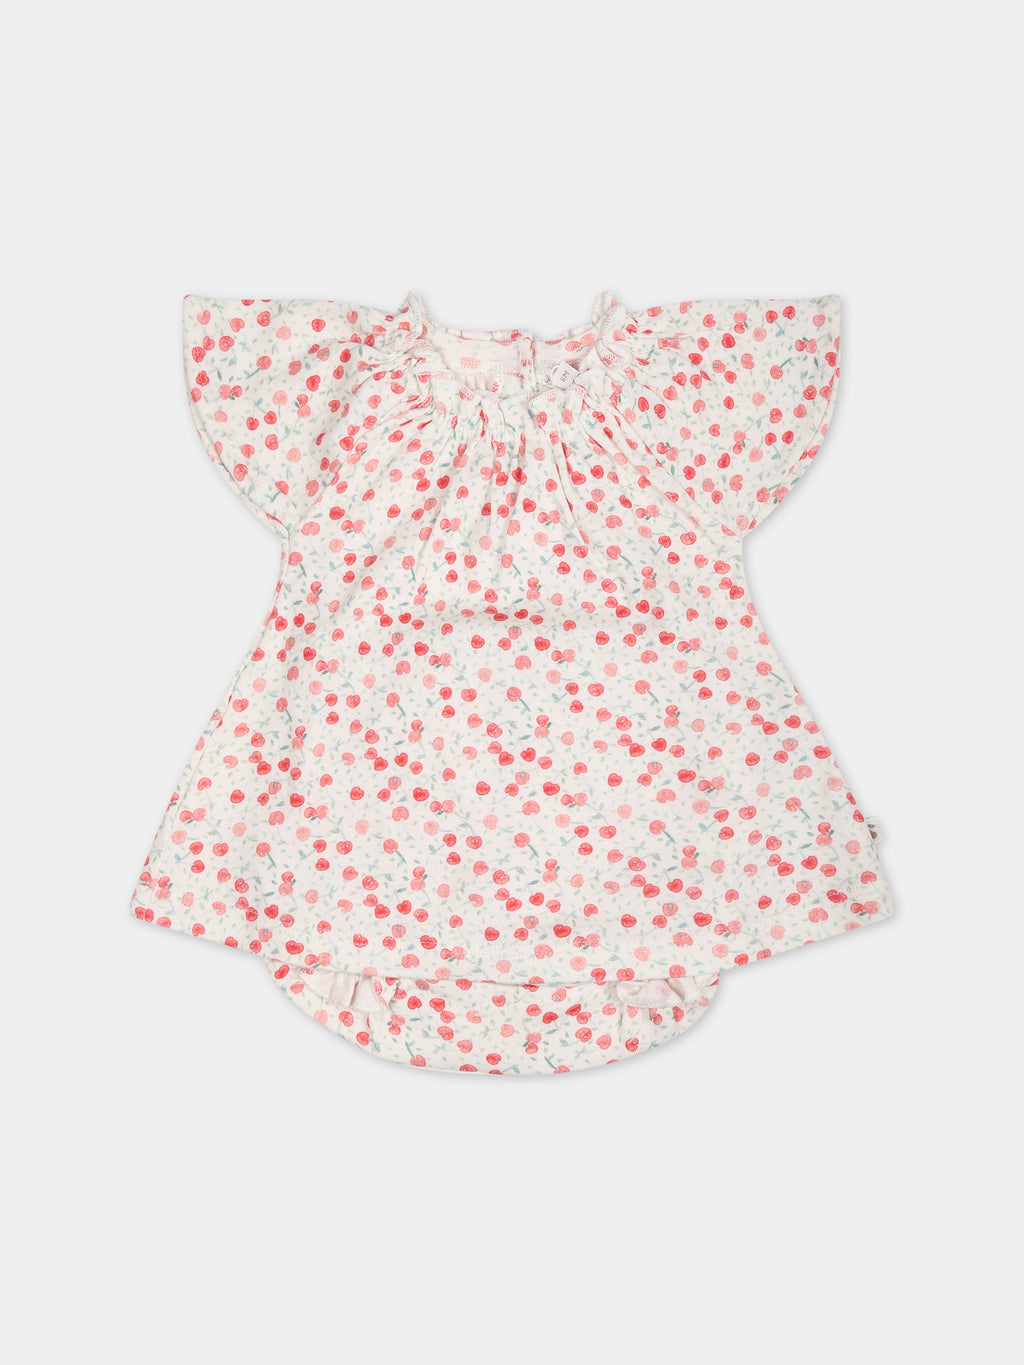 White set for baby girl with iconic cherries